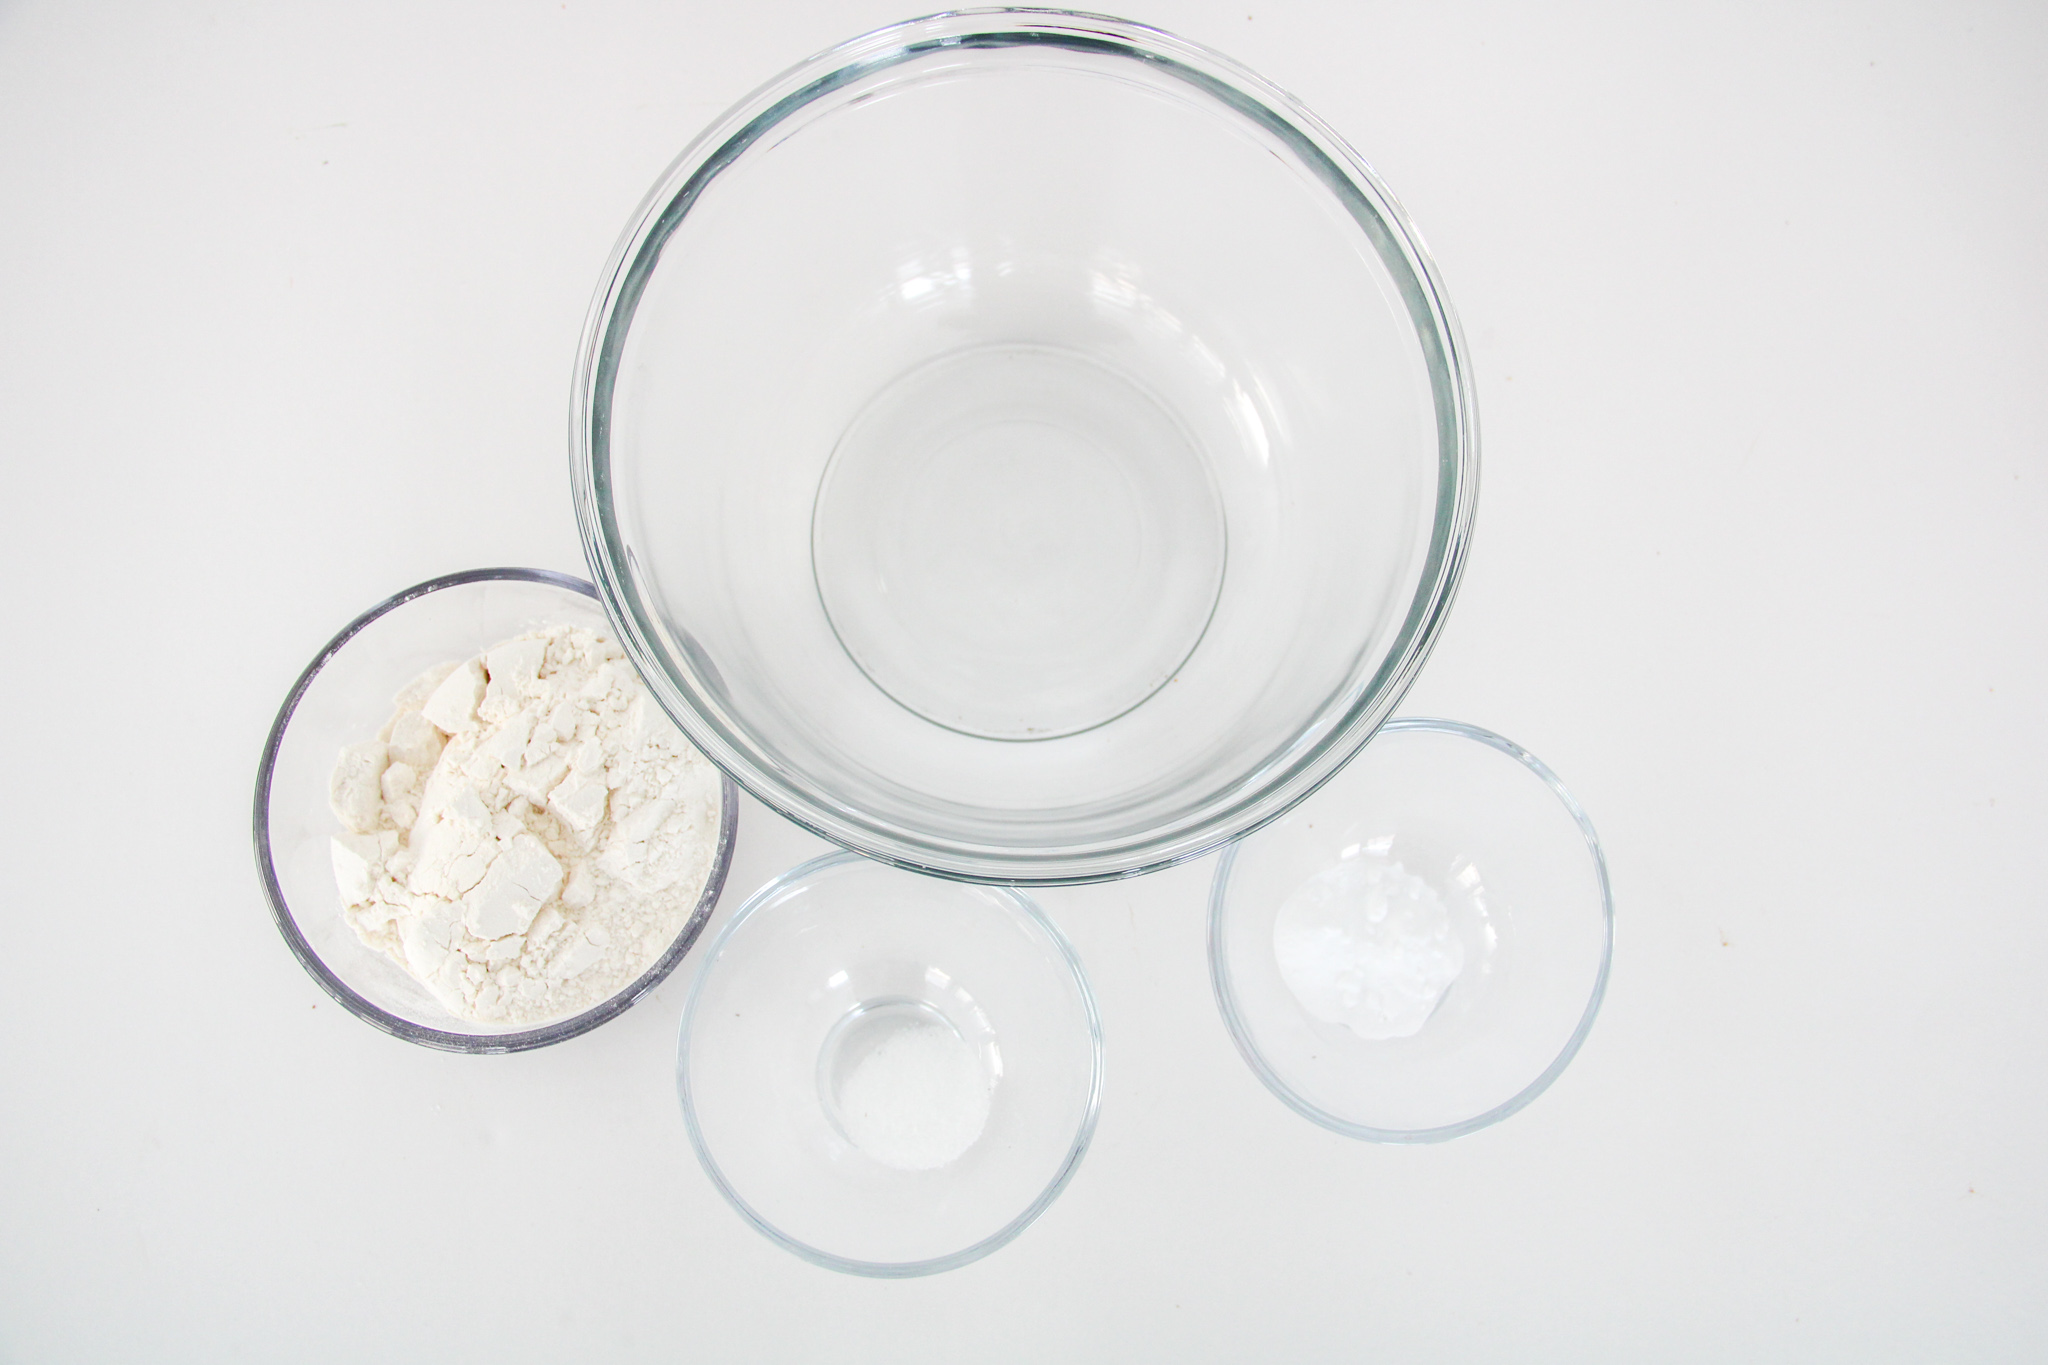 Emptry glass bowl and smaller glass bowls of flour, salt, and baking soda